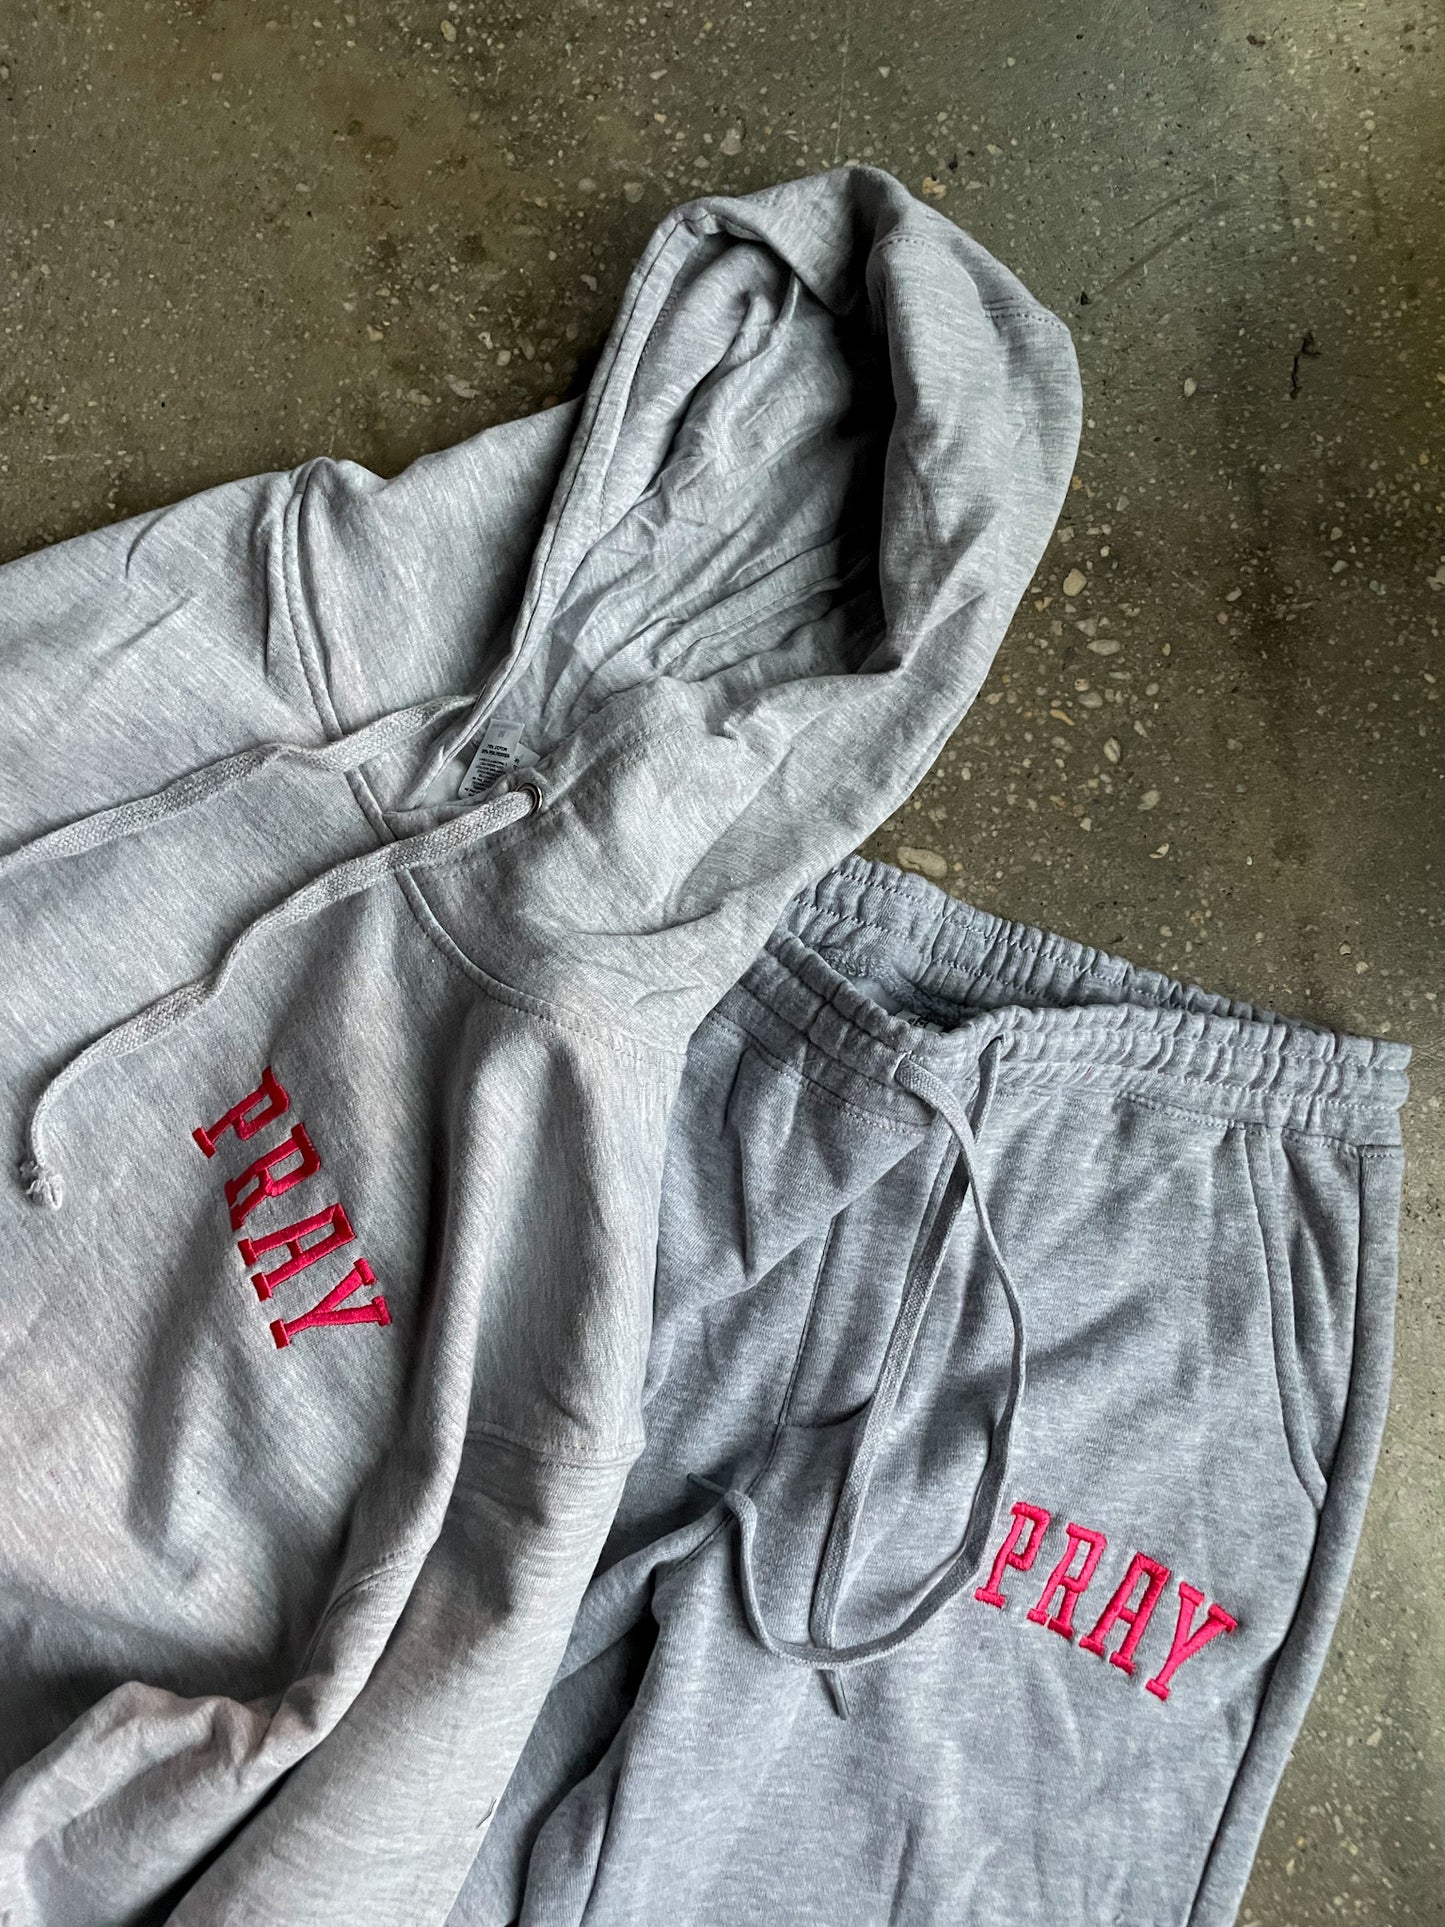 PRAY Embroidered Adult Box Hoodie